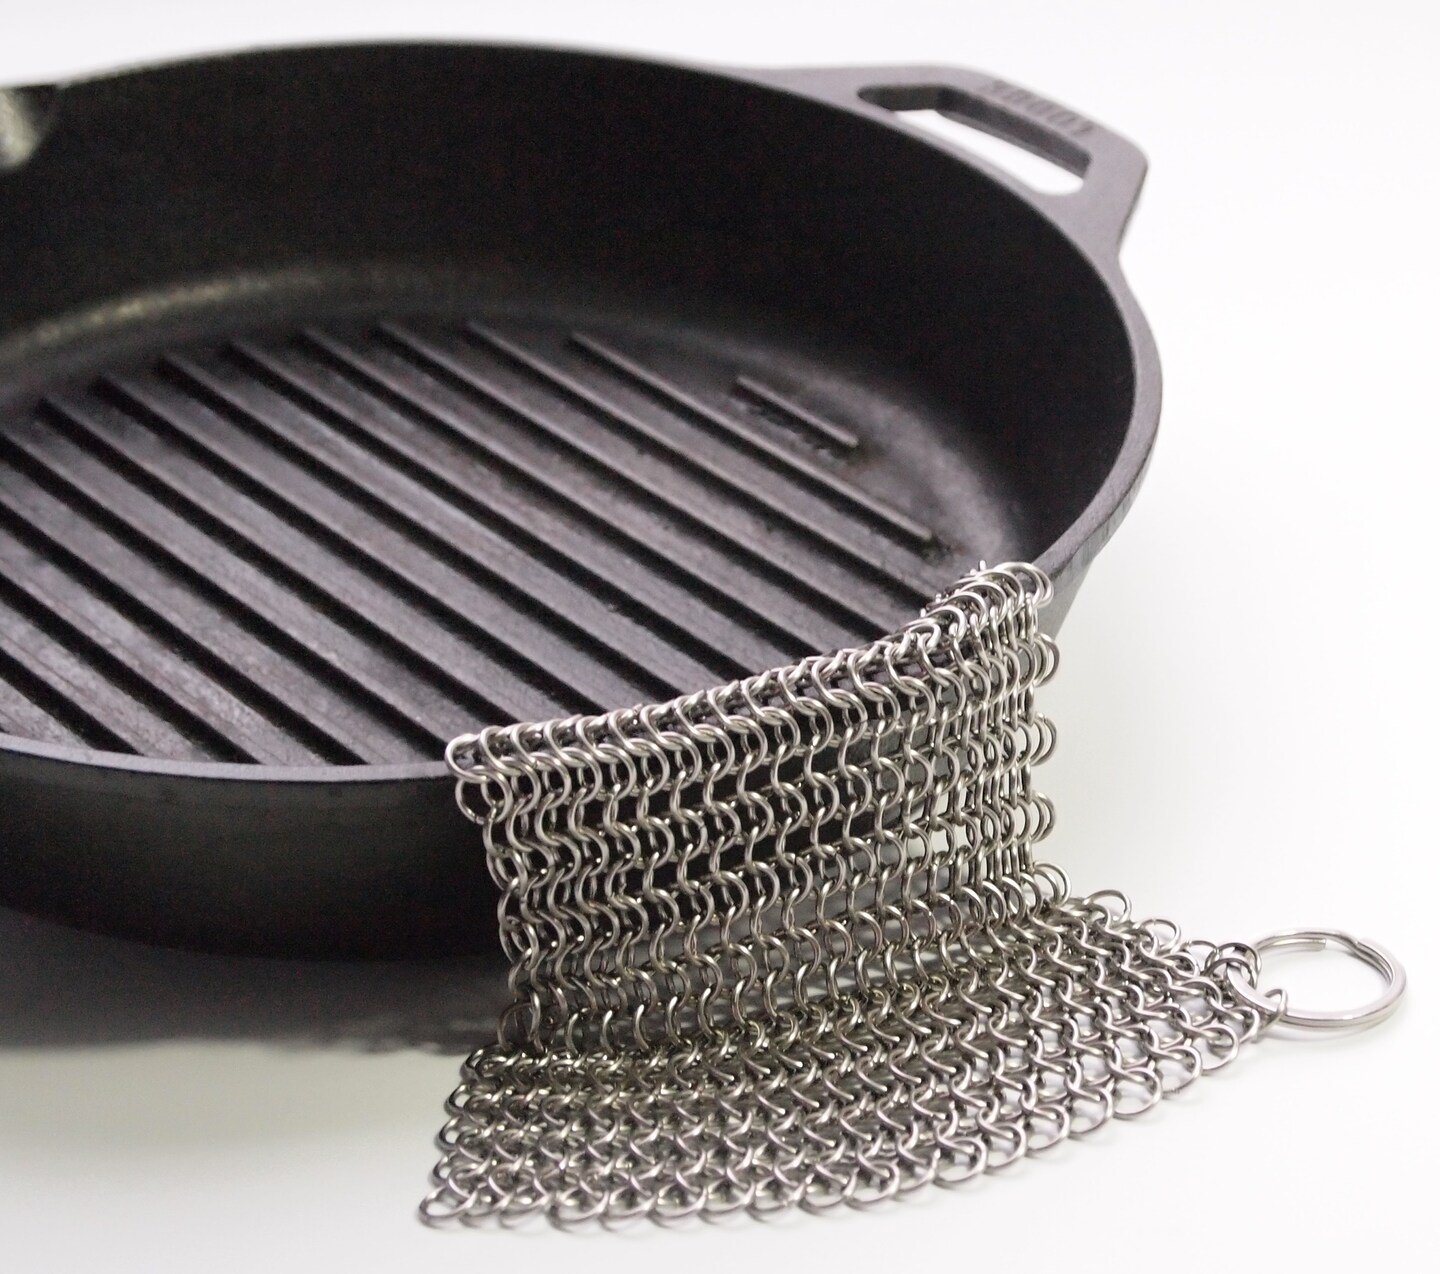 DIY Chainmail Scrubber Kit, Craft a Steel Scrubber for Cleaning Cast Iron  from Included Supplies and Tutorial with this Beginner DIY Kit